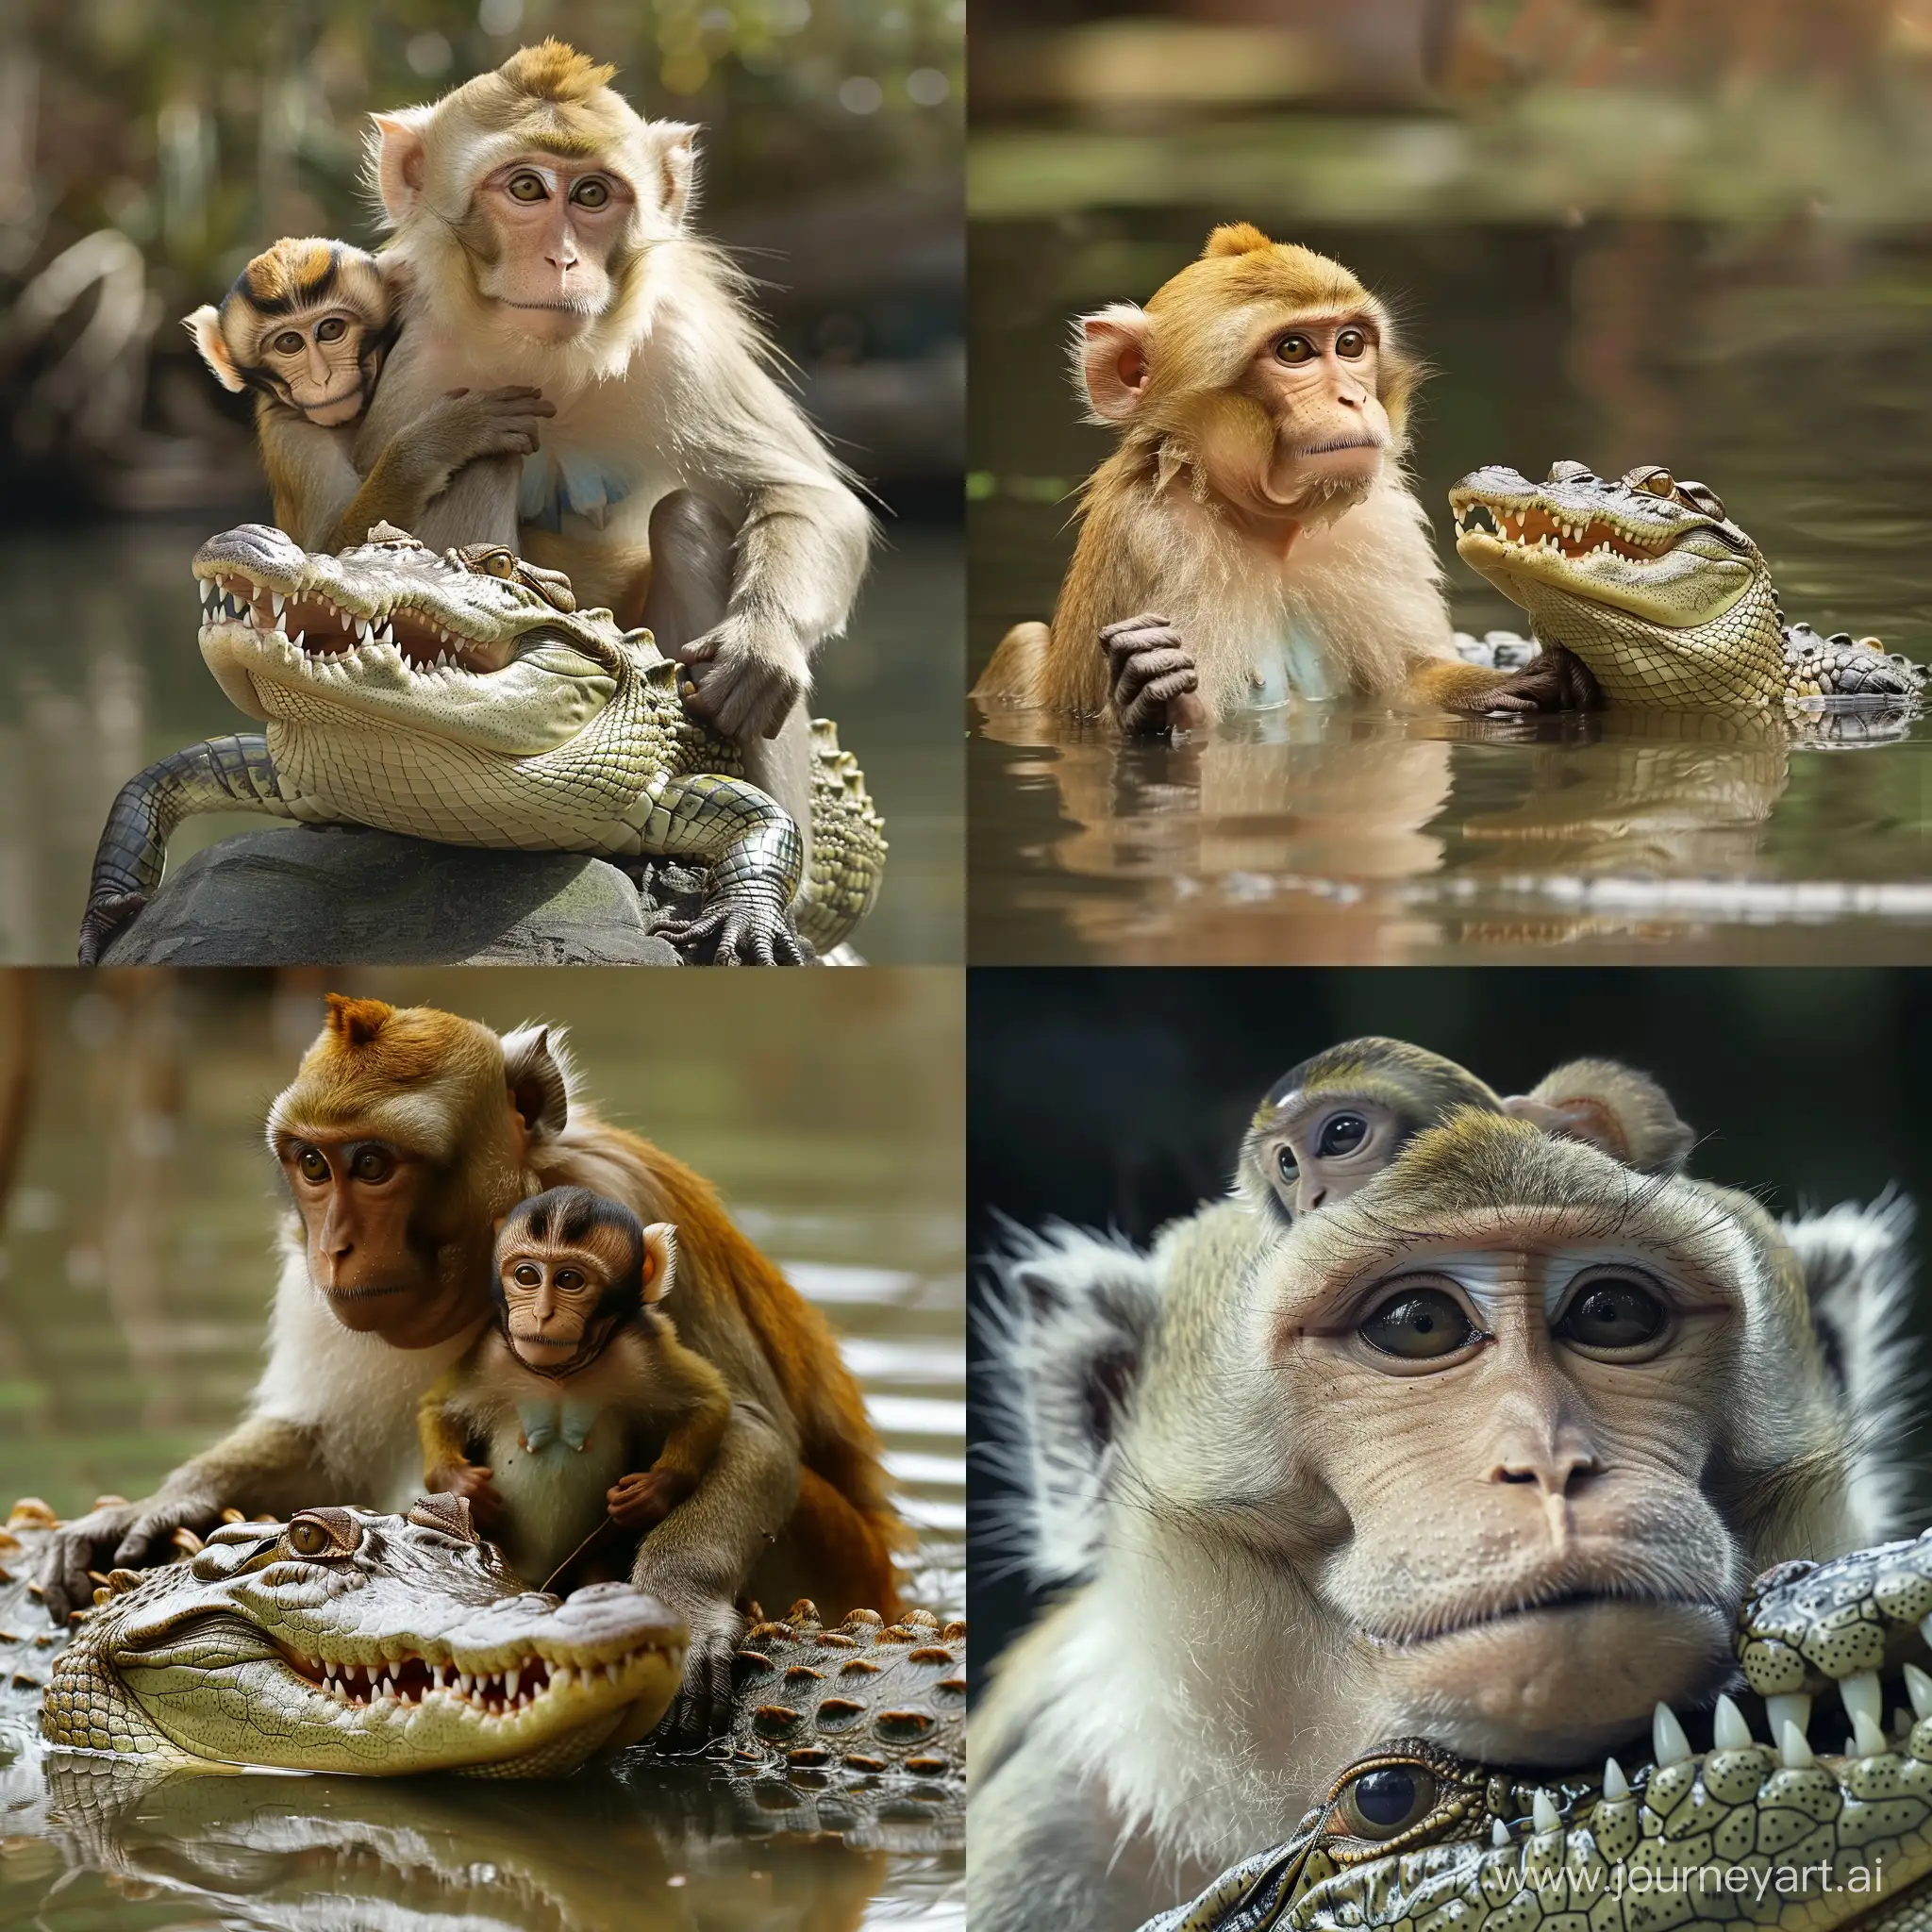 Monkey-and-Crocodile-Friendship-Playful-Interaction-Between-Two-Unlikely-Friends